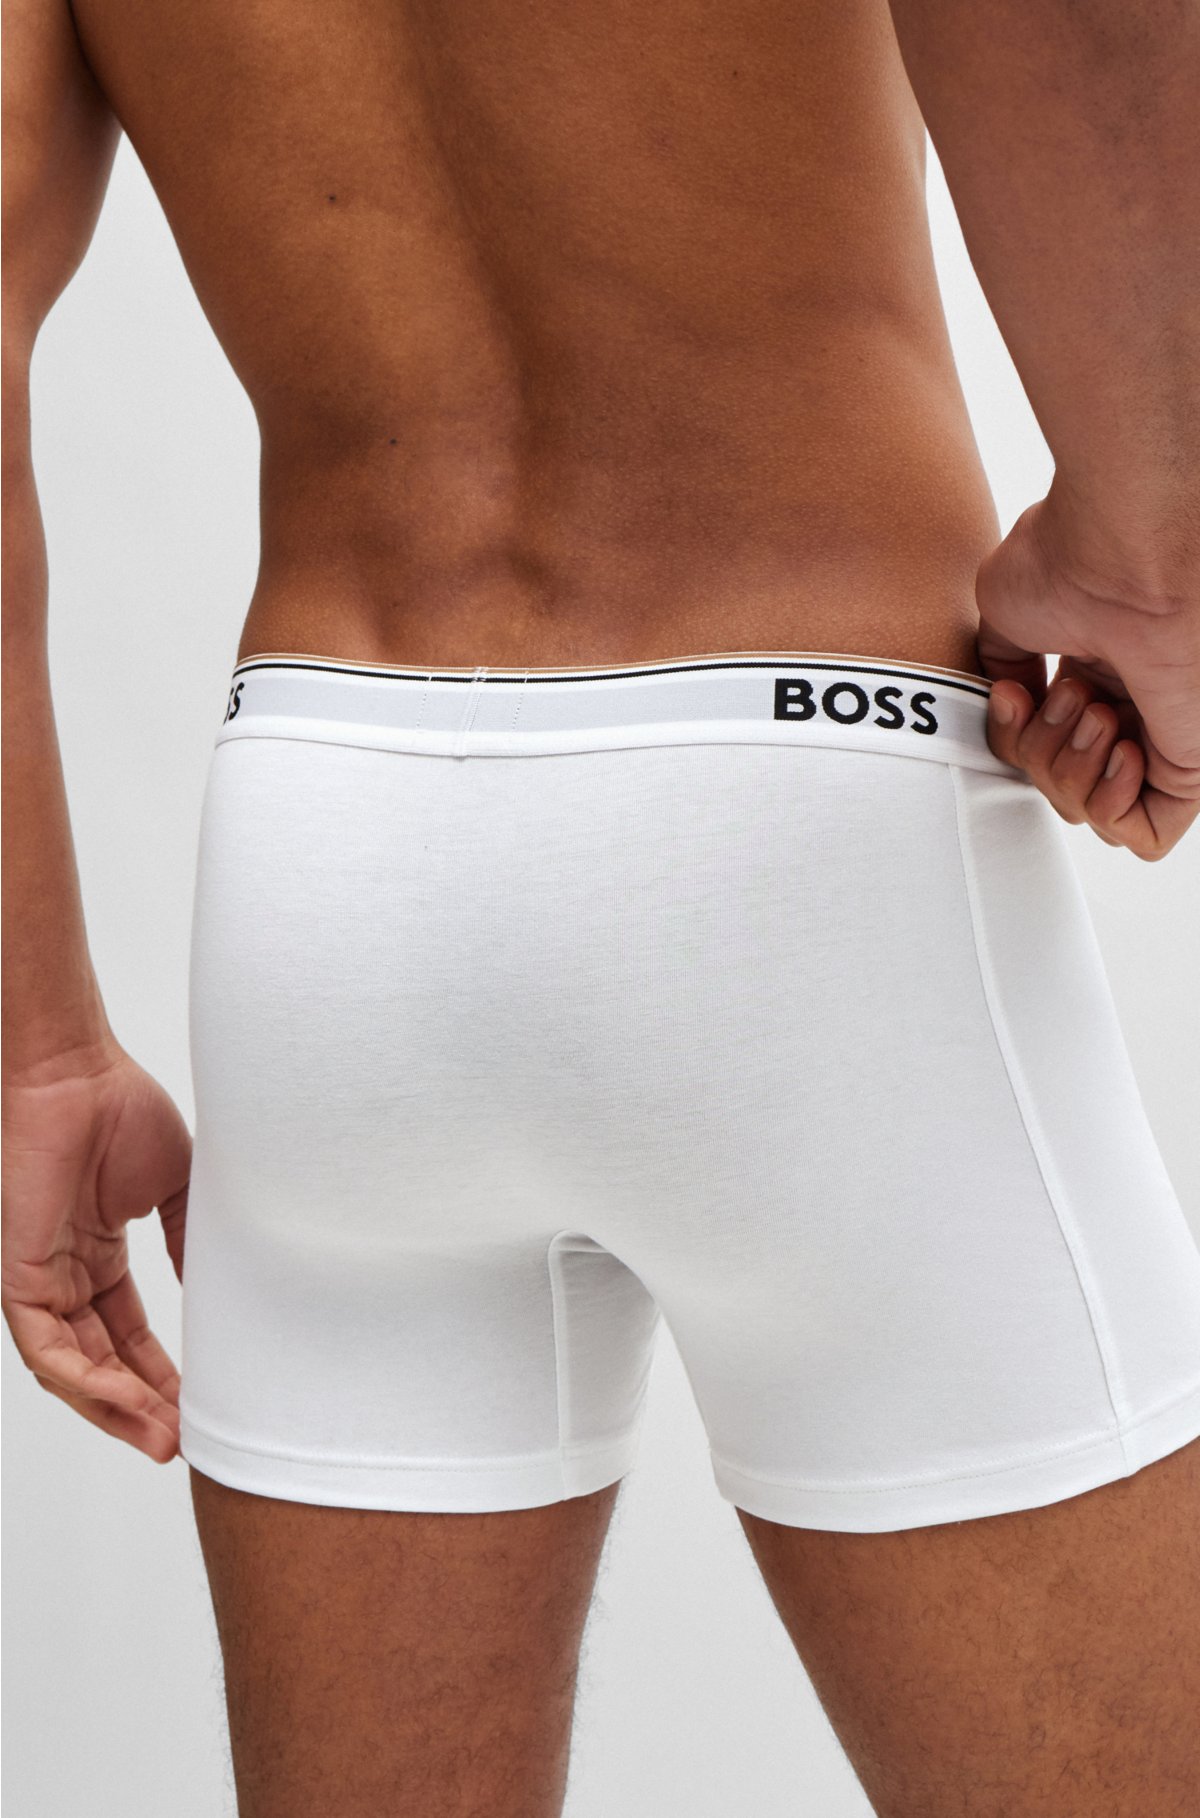 Three-pack - BOSS boxer logos briefs of with stretch-cotton